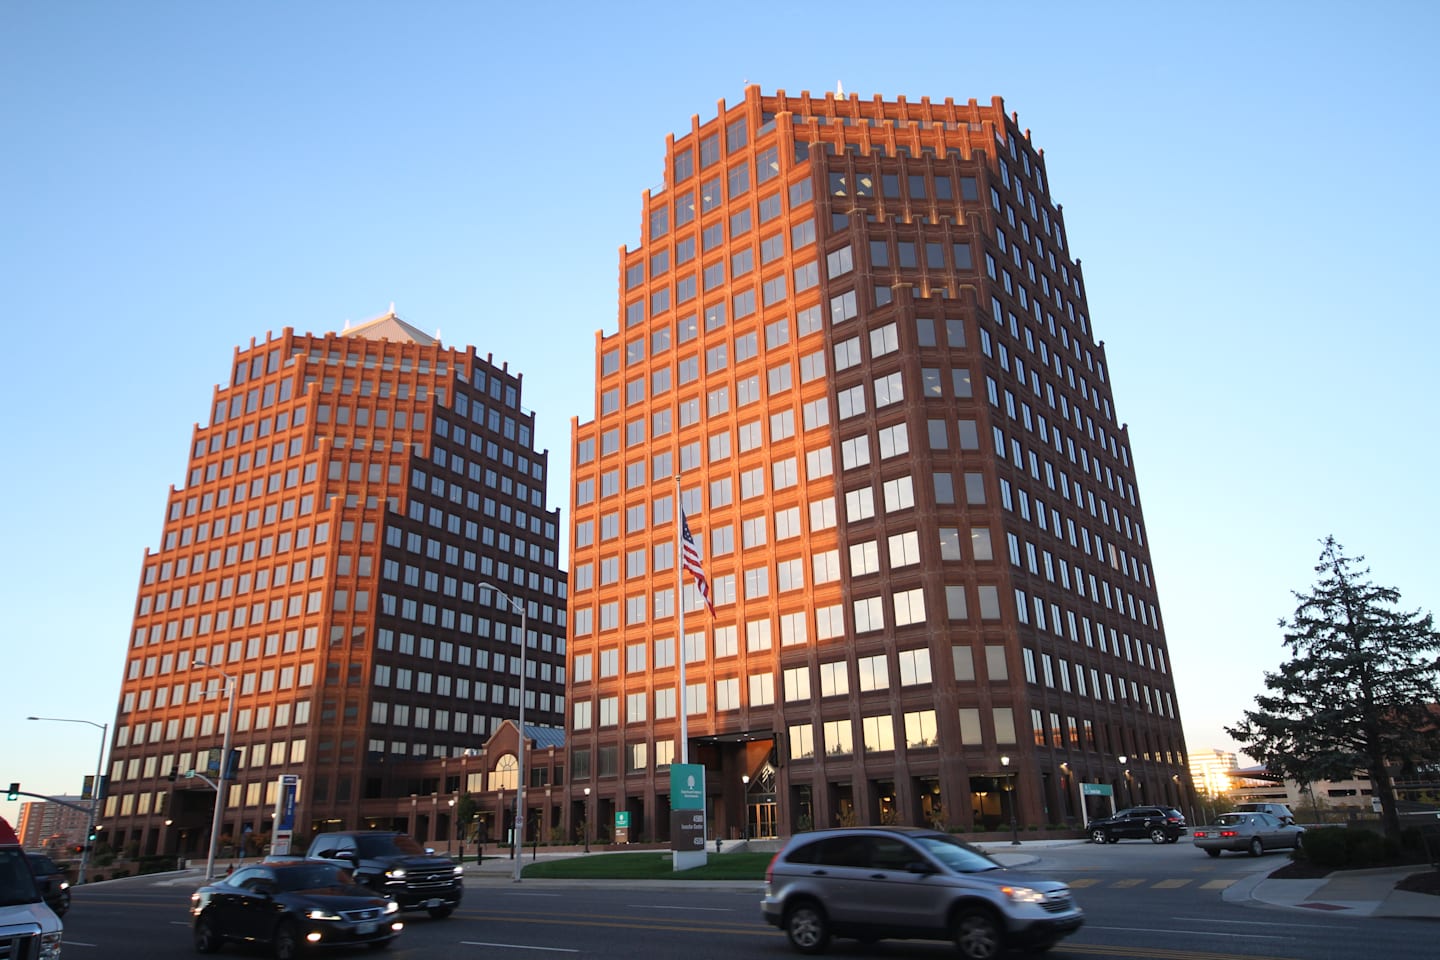 Day time view of American Century Headquarters in Kansas City, Missouri